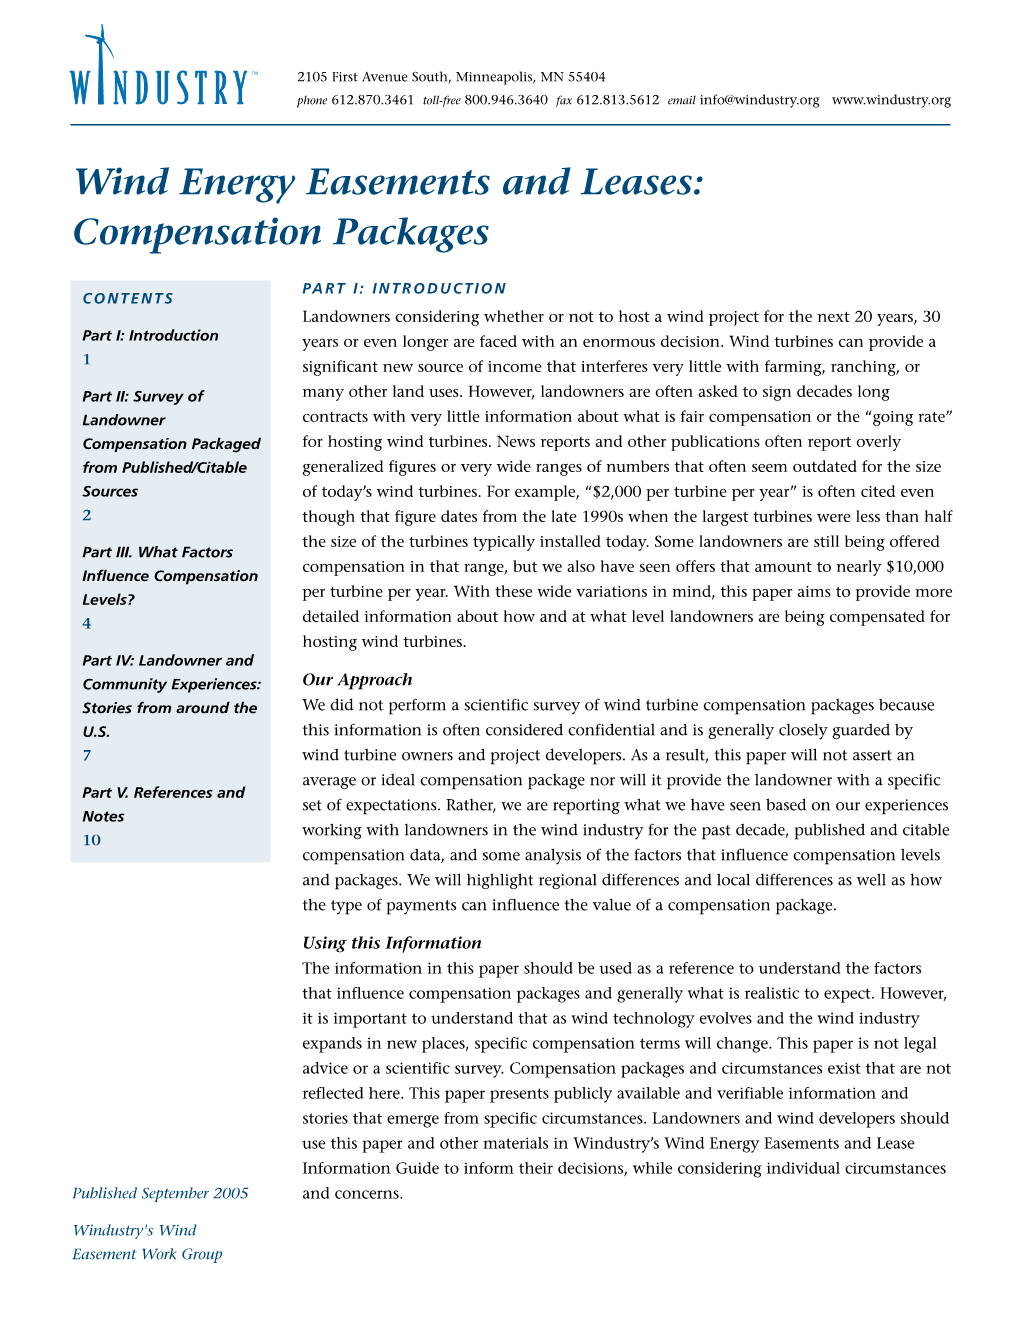 Wind Energy Easements and Leases: Compensation Packages